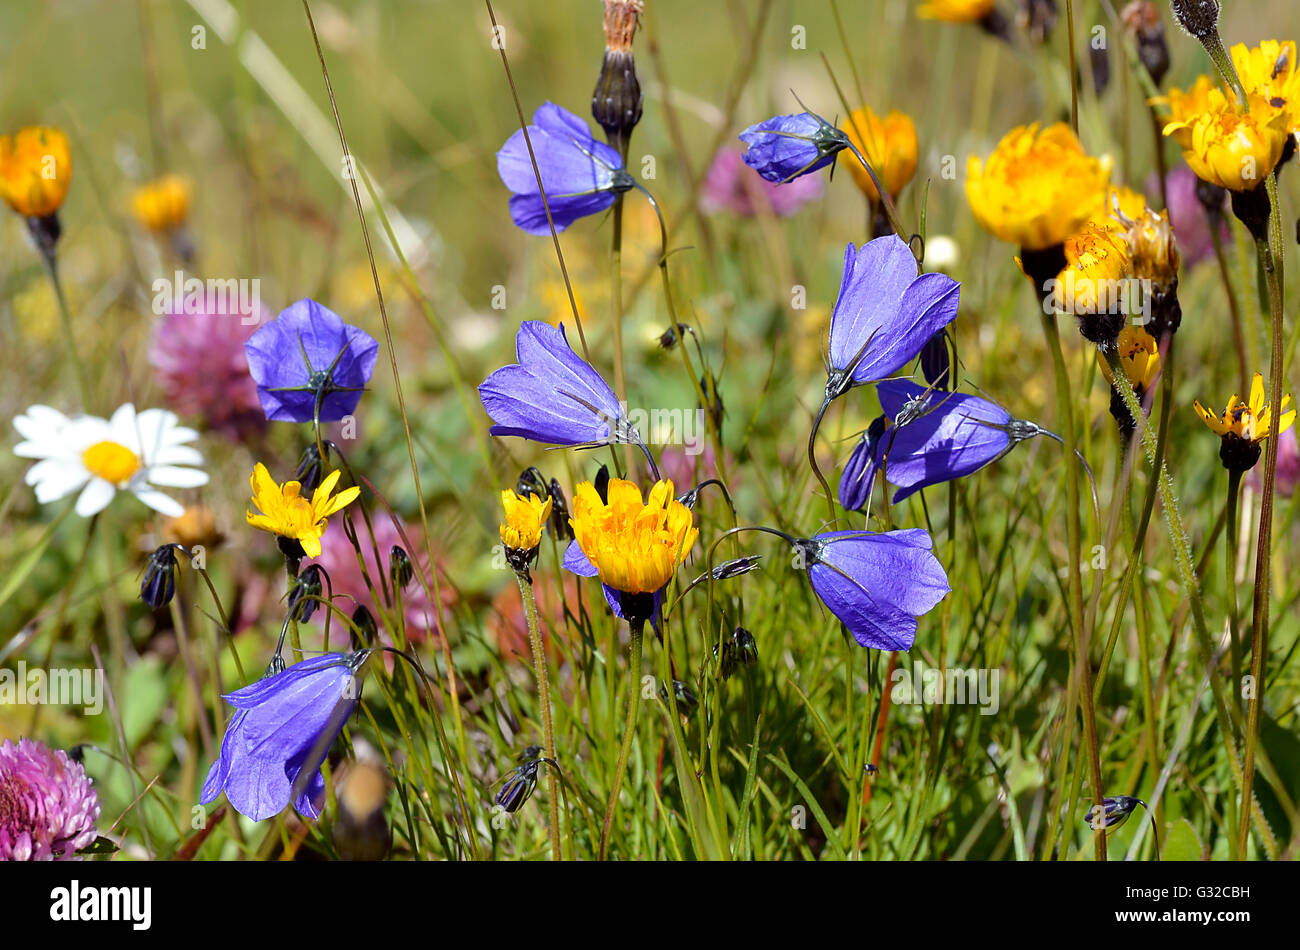 Flowers of Alps French with blue campanulas (Campanula cochleariifolia also Campanula cochlearifolia) Stock Photo